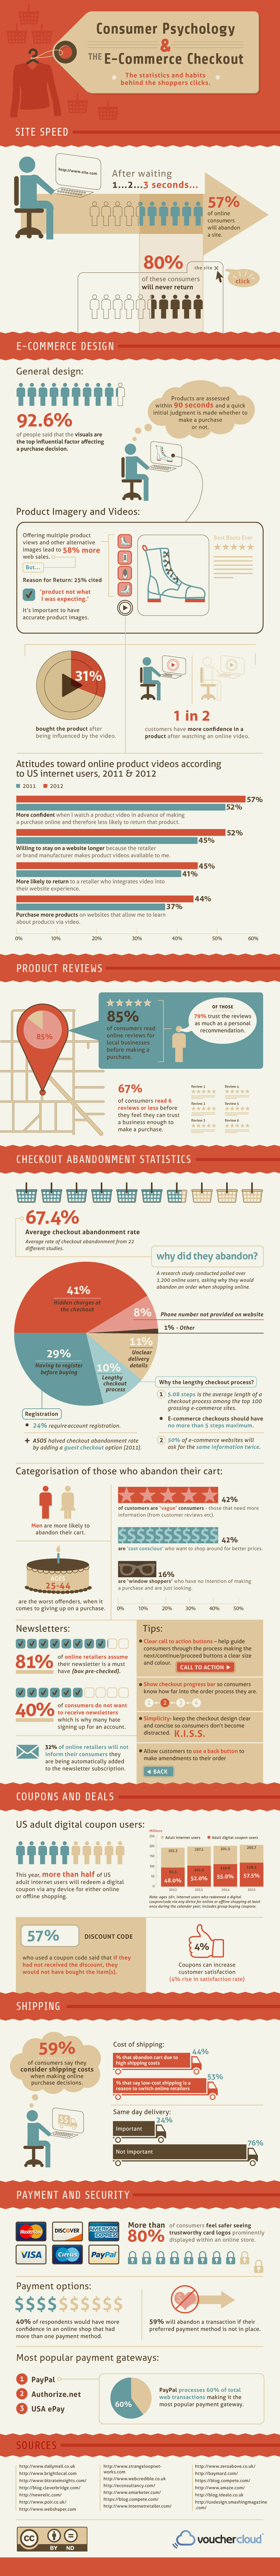 Consumer-Psychology-and-ECommerce-Checkouts-Infographic.jpg